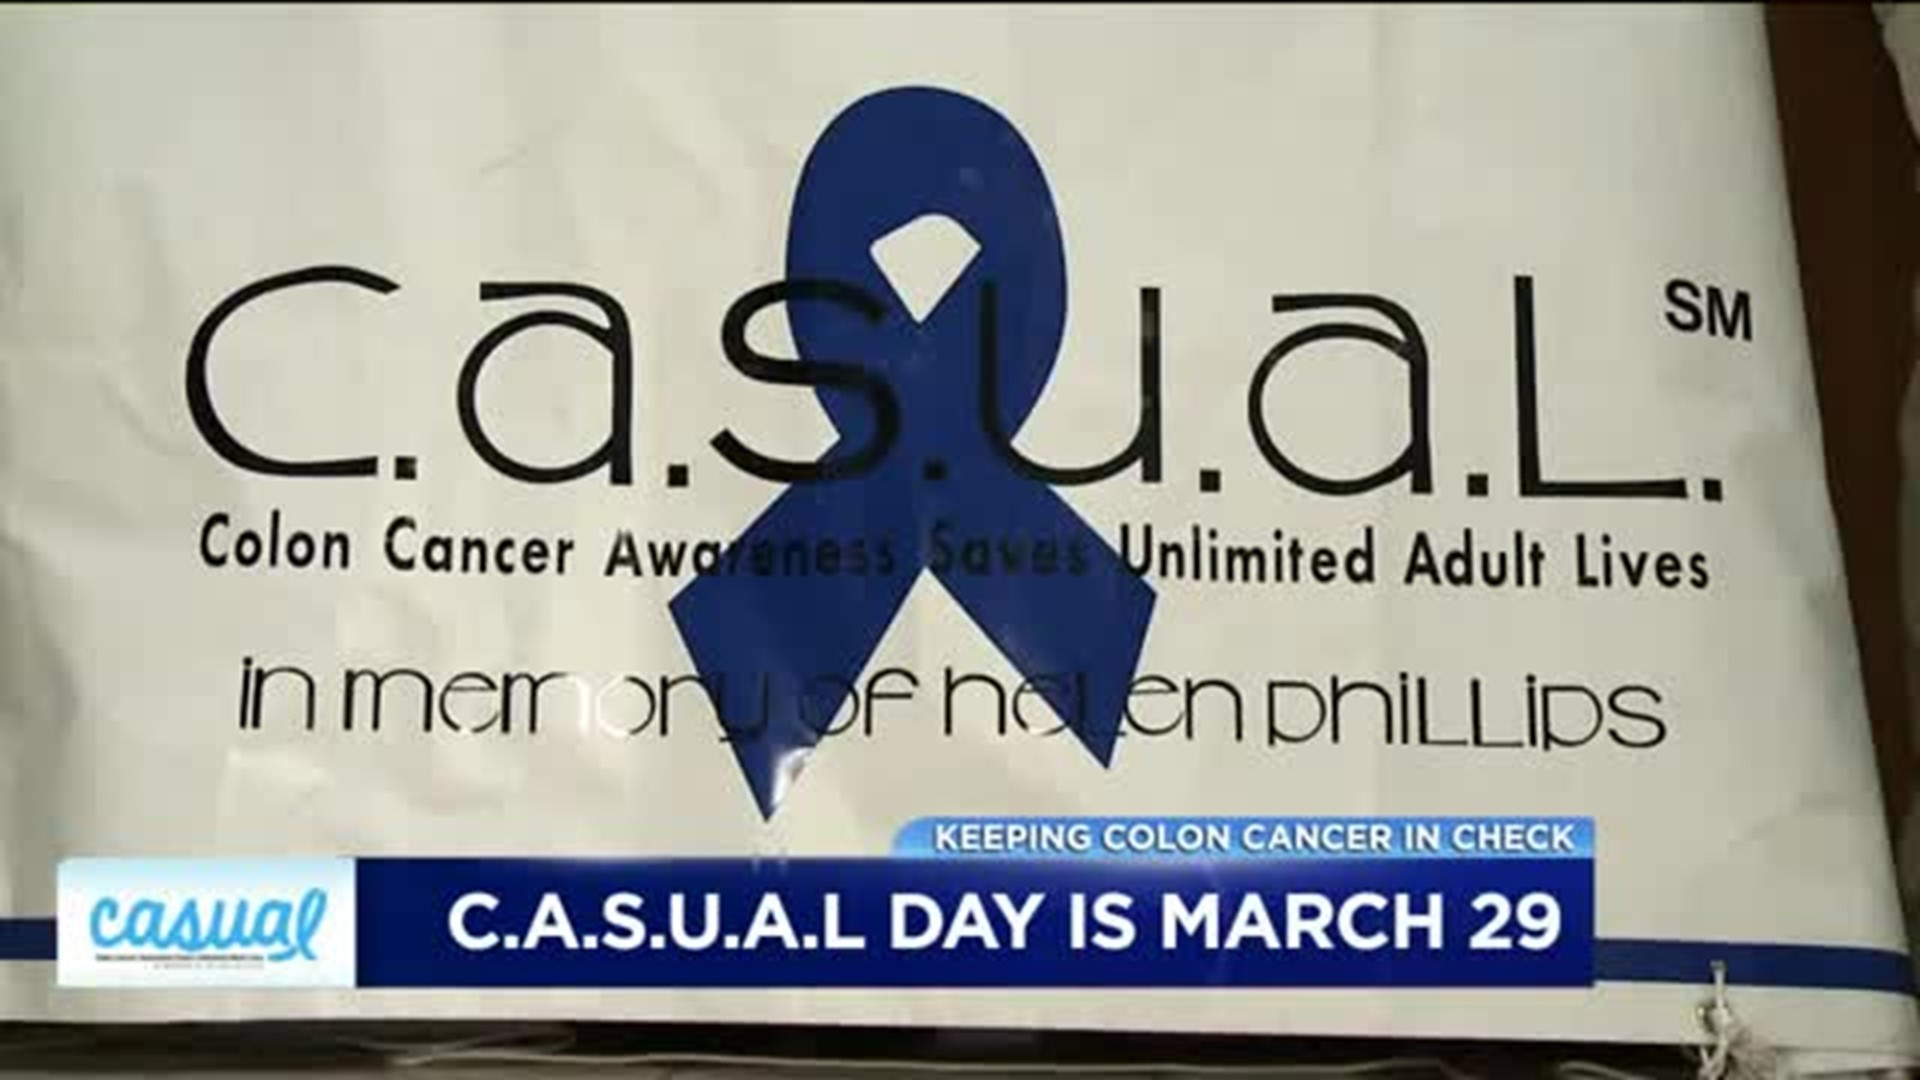 Kicking Colon Cancer: C.A.S.U.A.L. Day 2018 Approaches